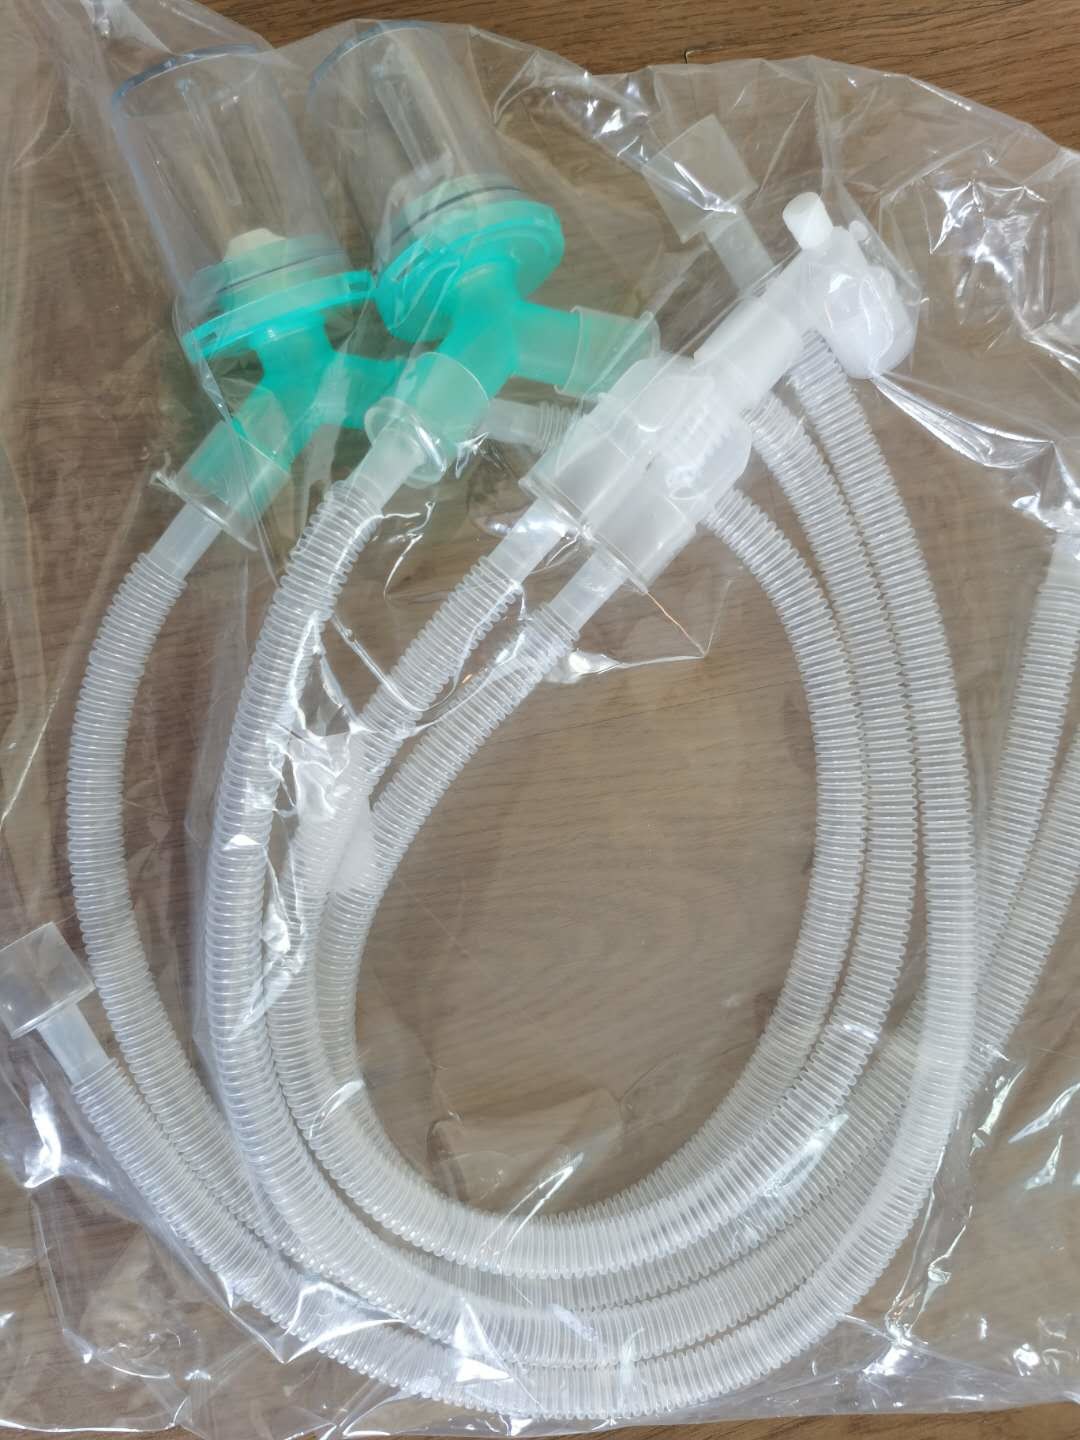  15mm Diameter 1.6m Length Anesthesia Breathing Circuits Adult Type Manufactures